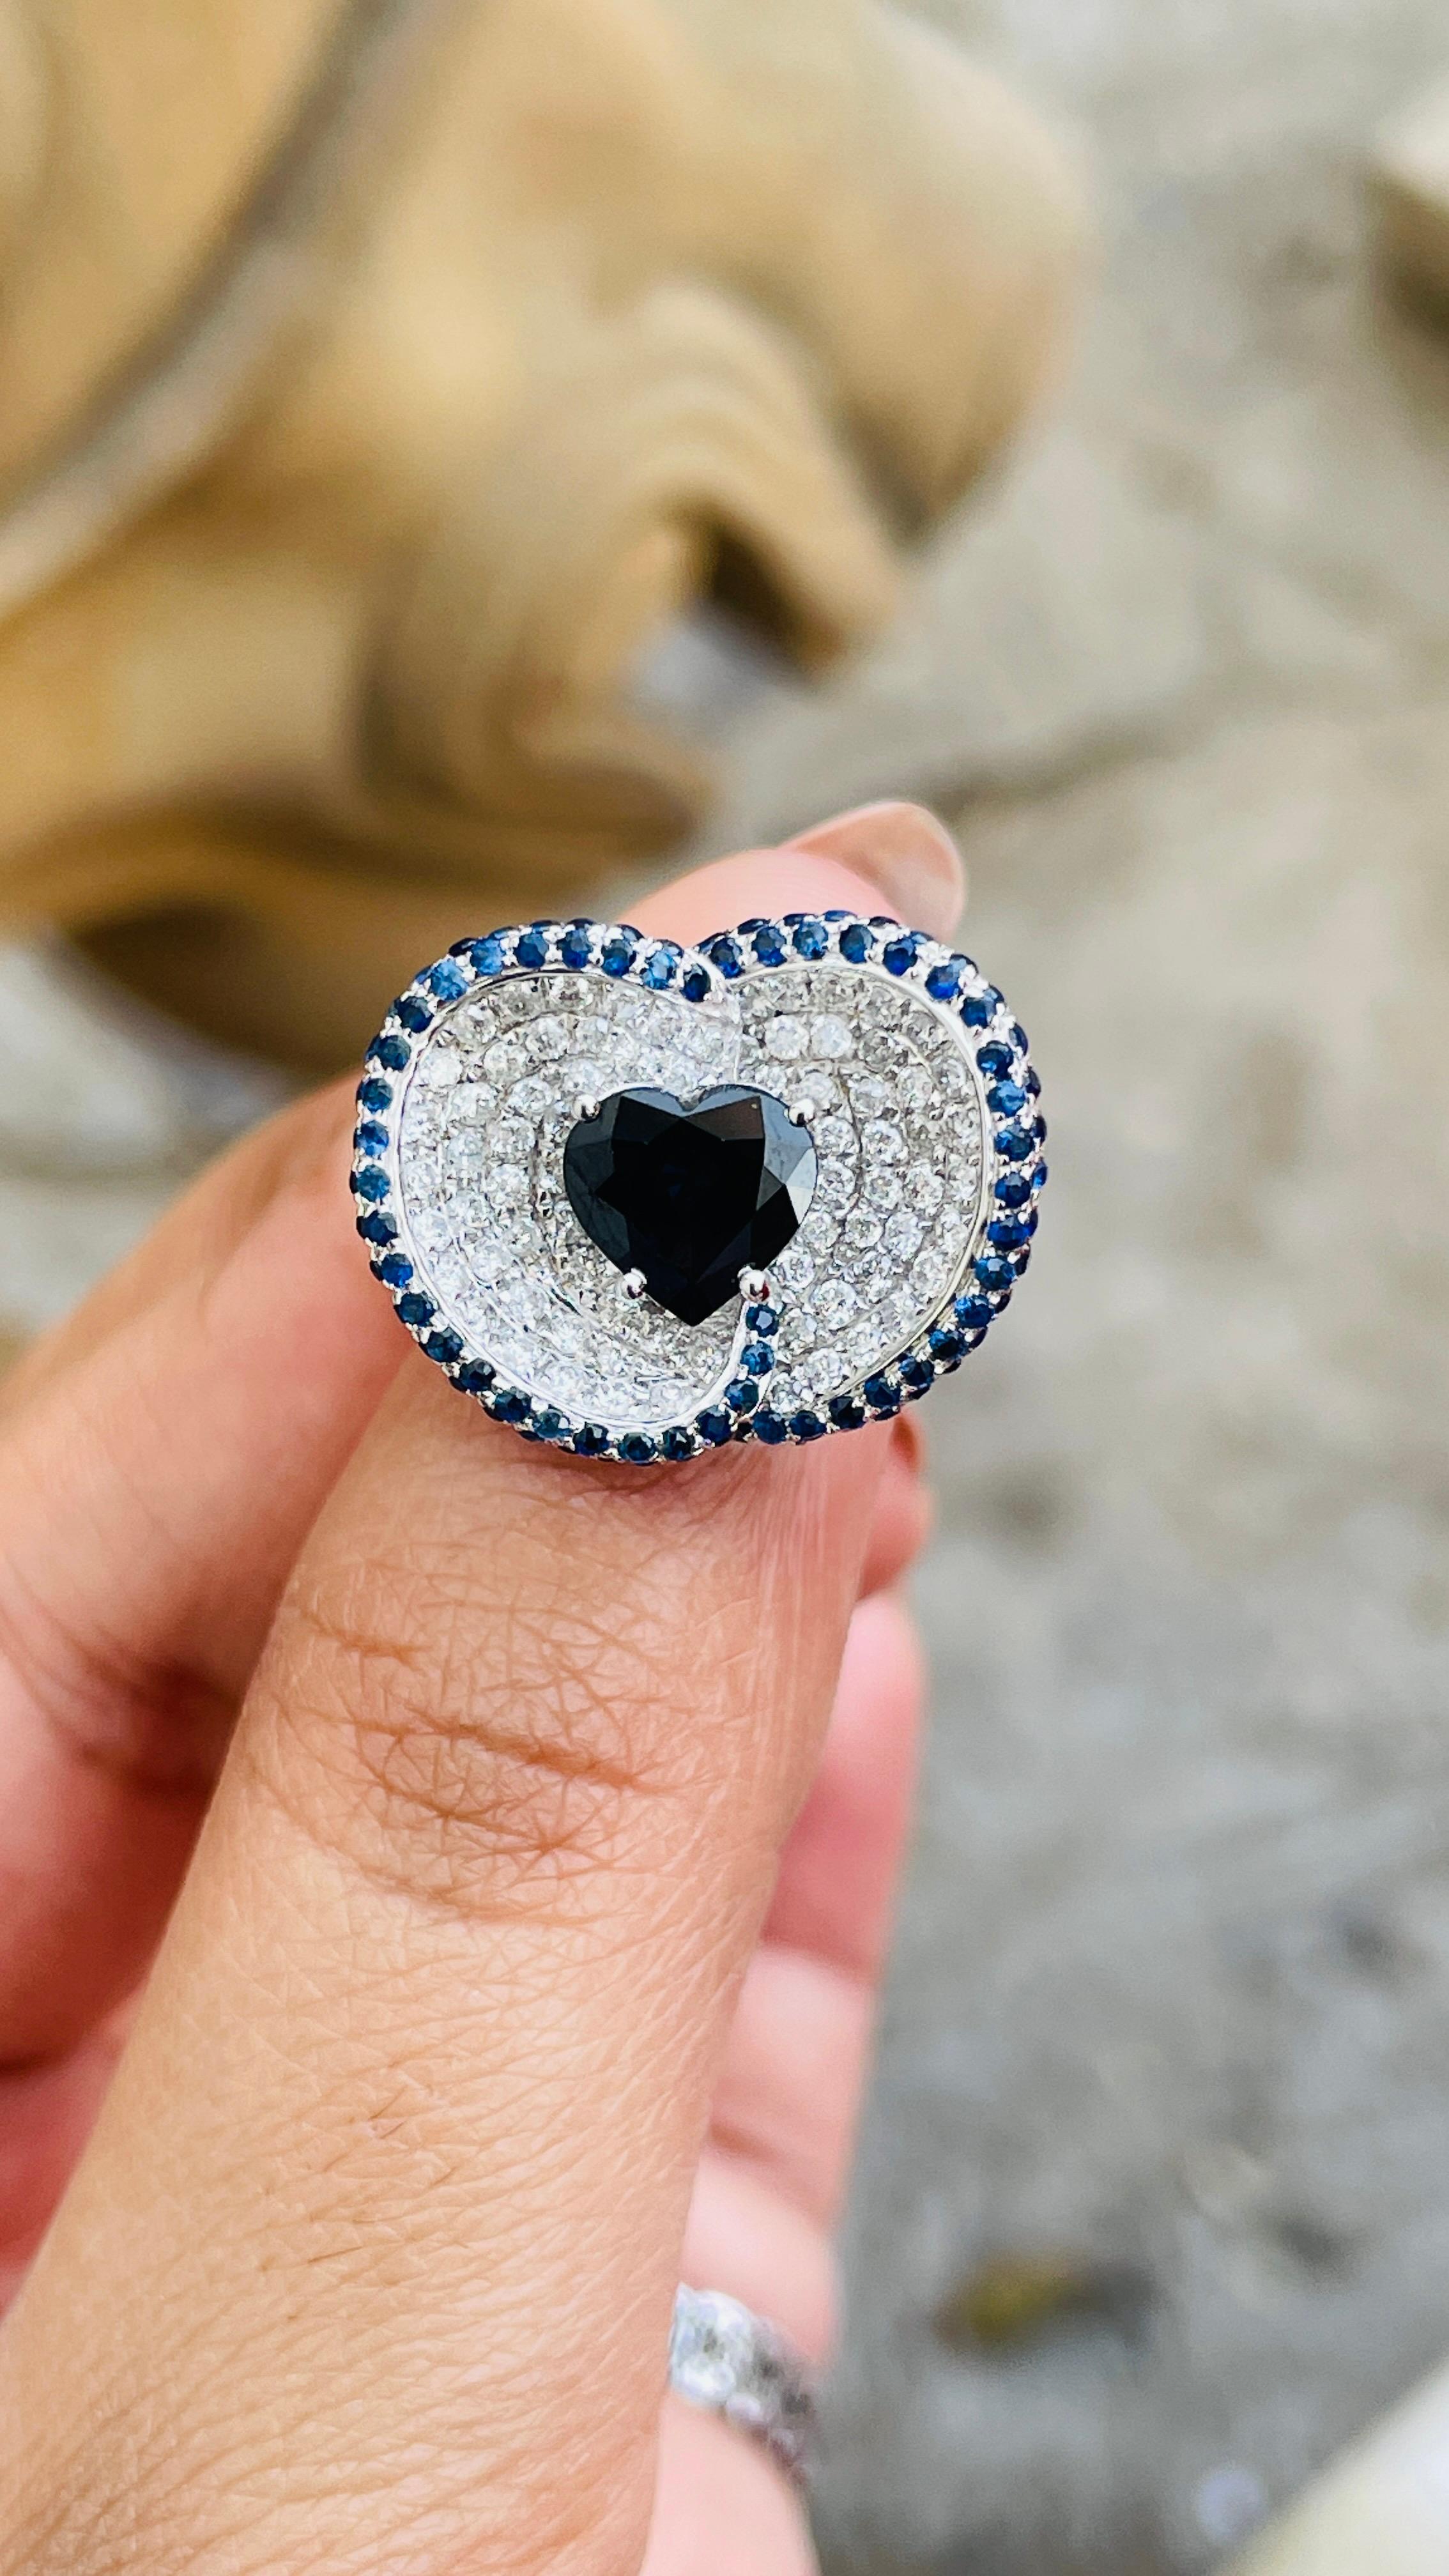 For Sale:  3.35 Carat Heart Cut Blue Sapphire and Diamond Unique Ring in 14K White Gold 7